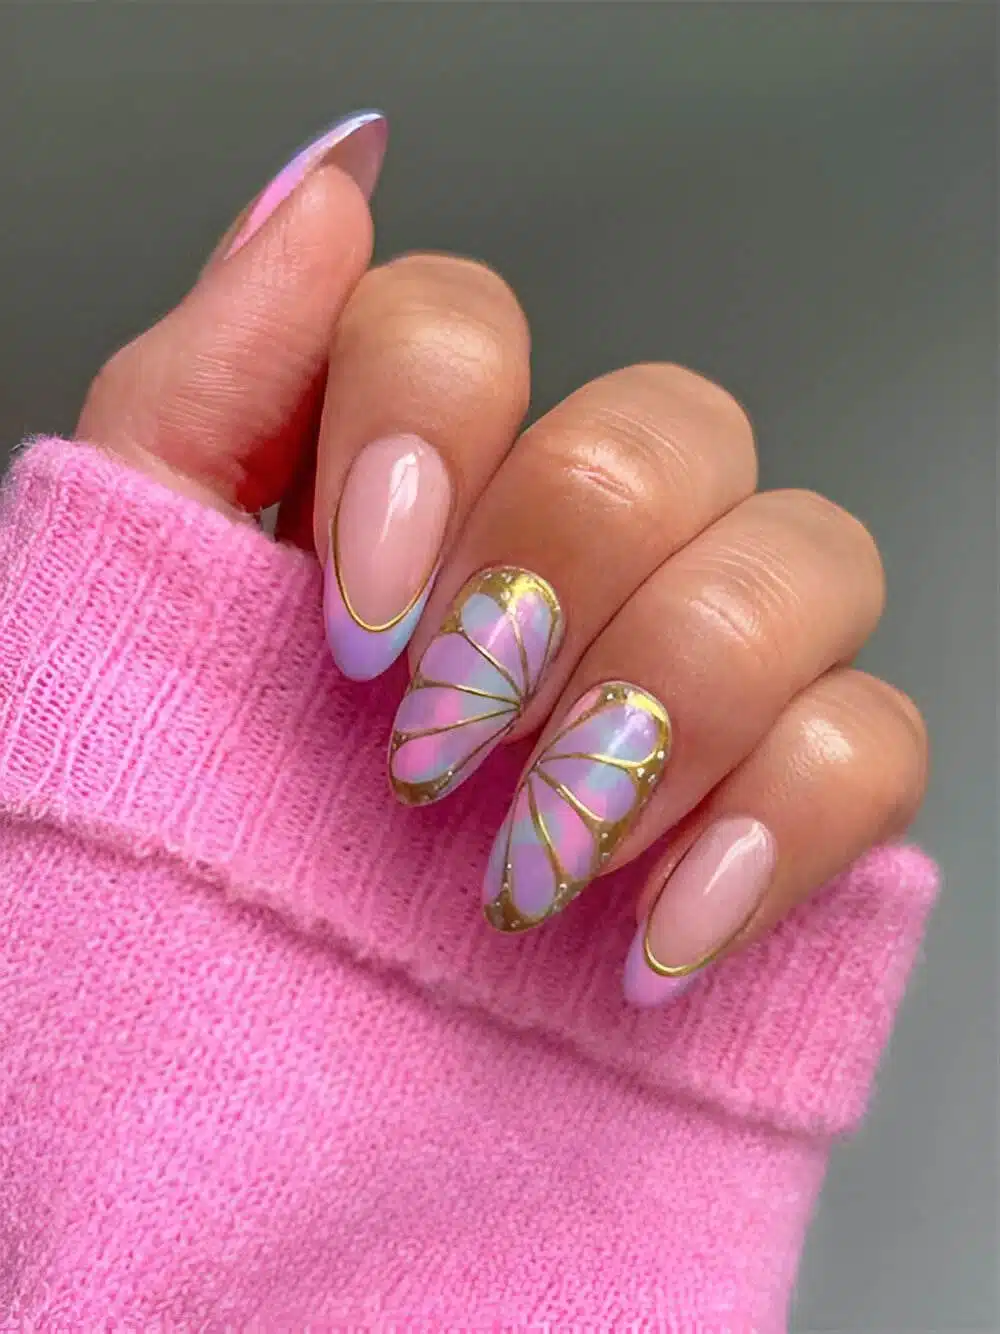 30 Trendiest Nail Designs To Stay Stylish All Year Round - 91